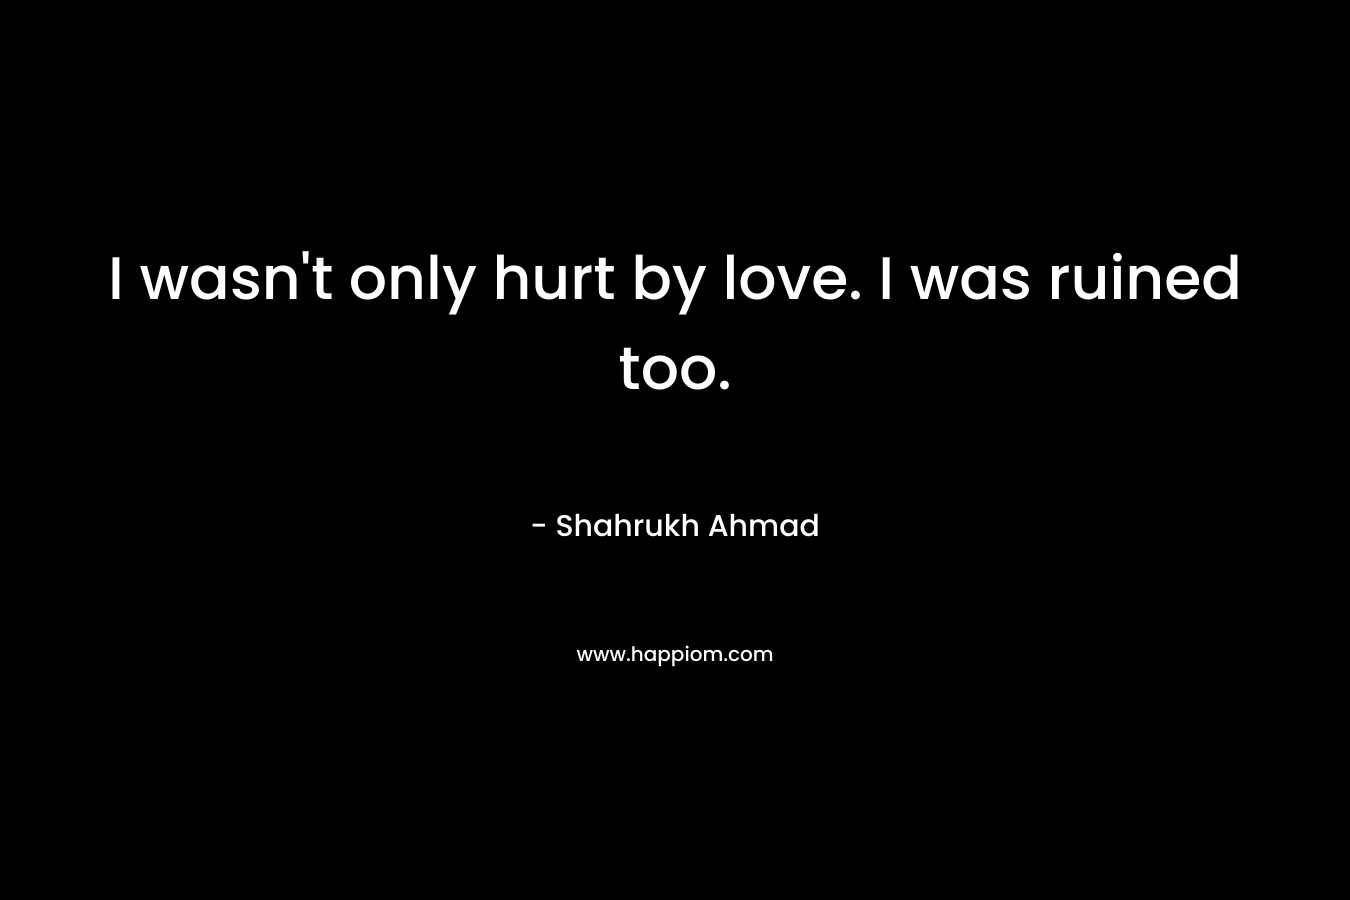 I wasn't only hurt by love. I was ruined too.